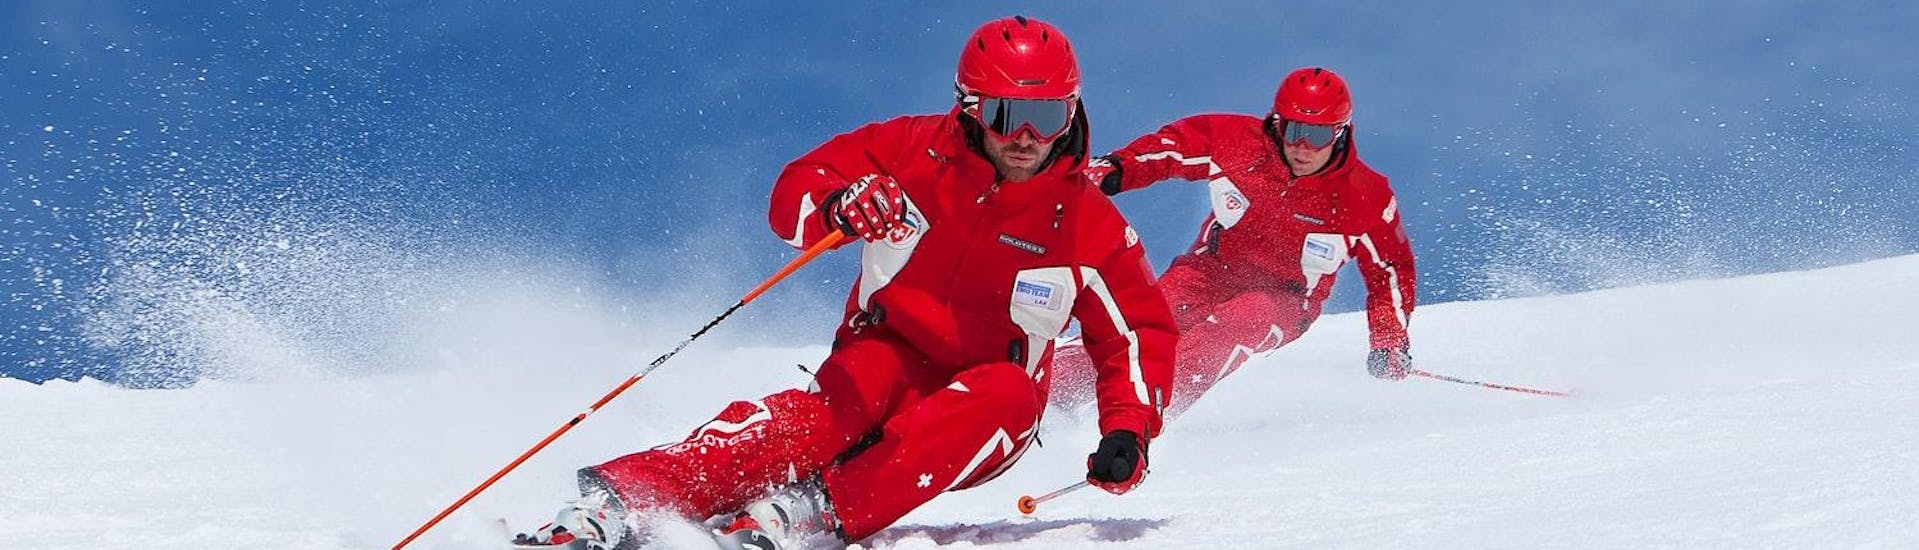 Private Ski Lessons for Adults of All Levels with Swiss Ski School Samnaun - Hero image